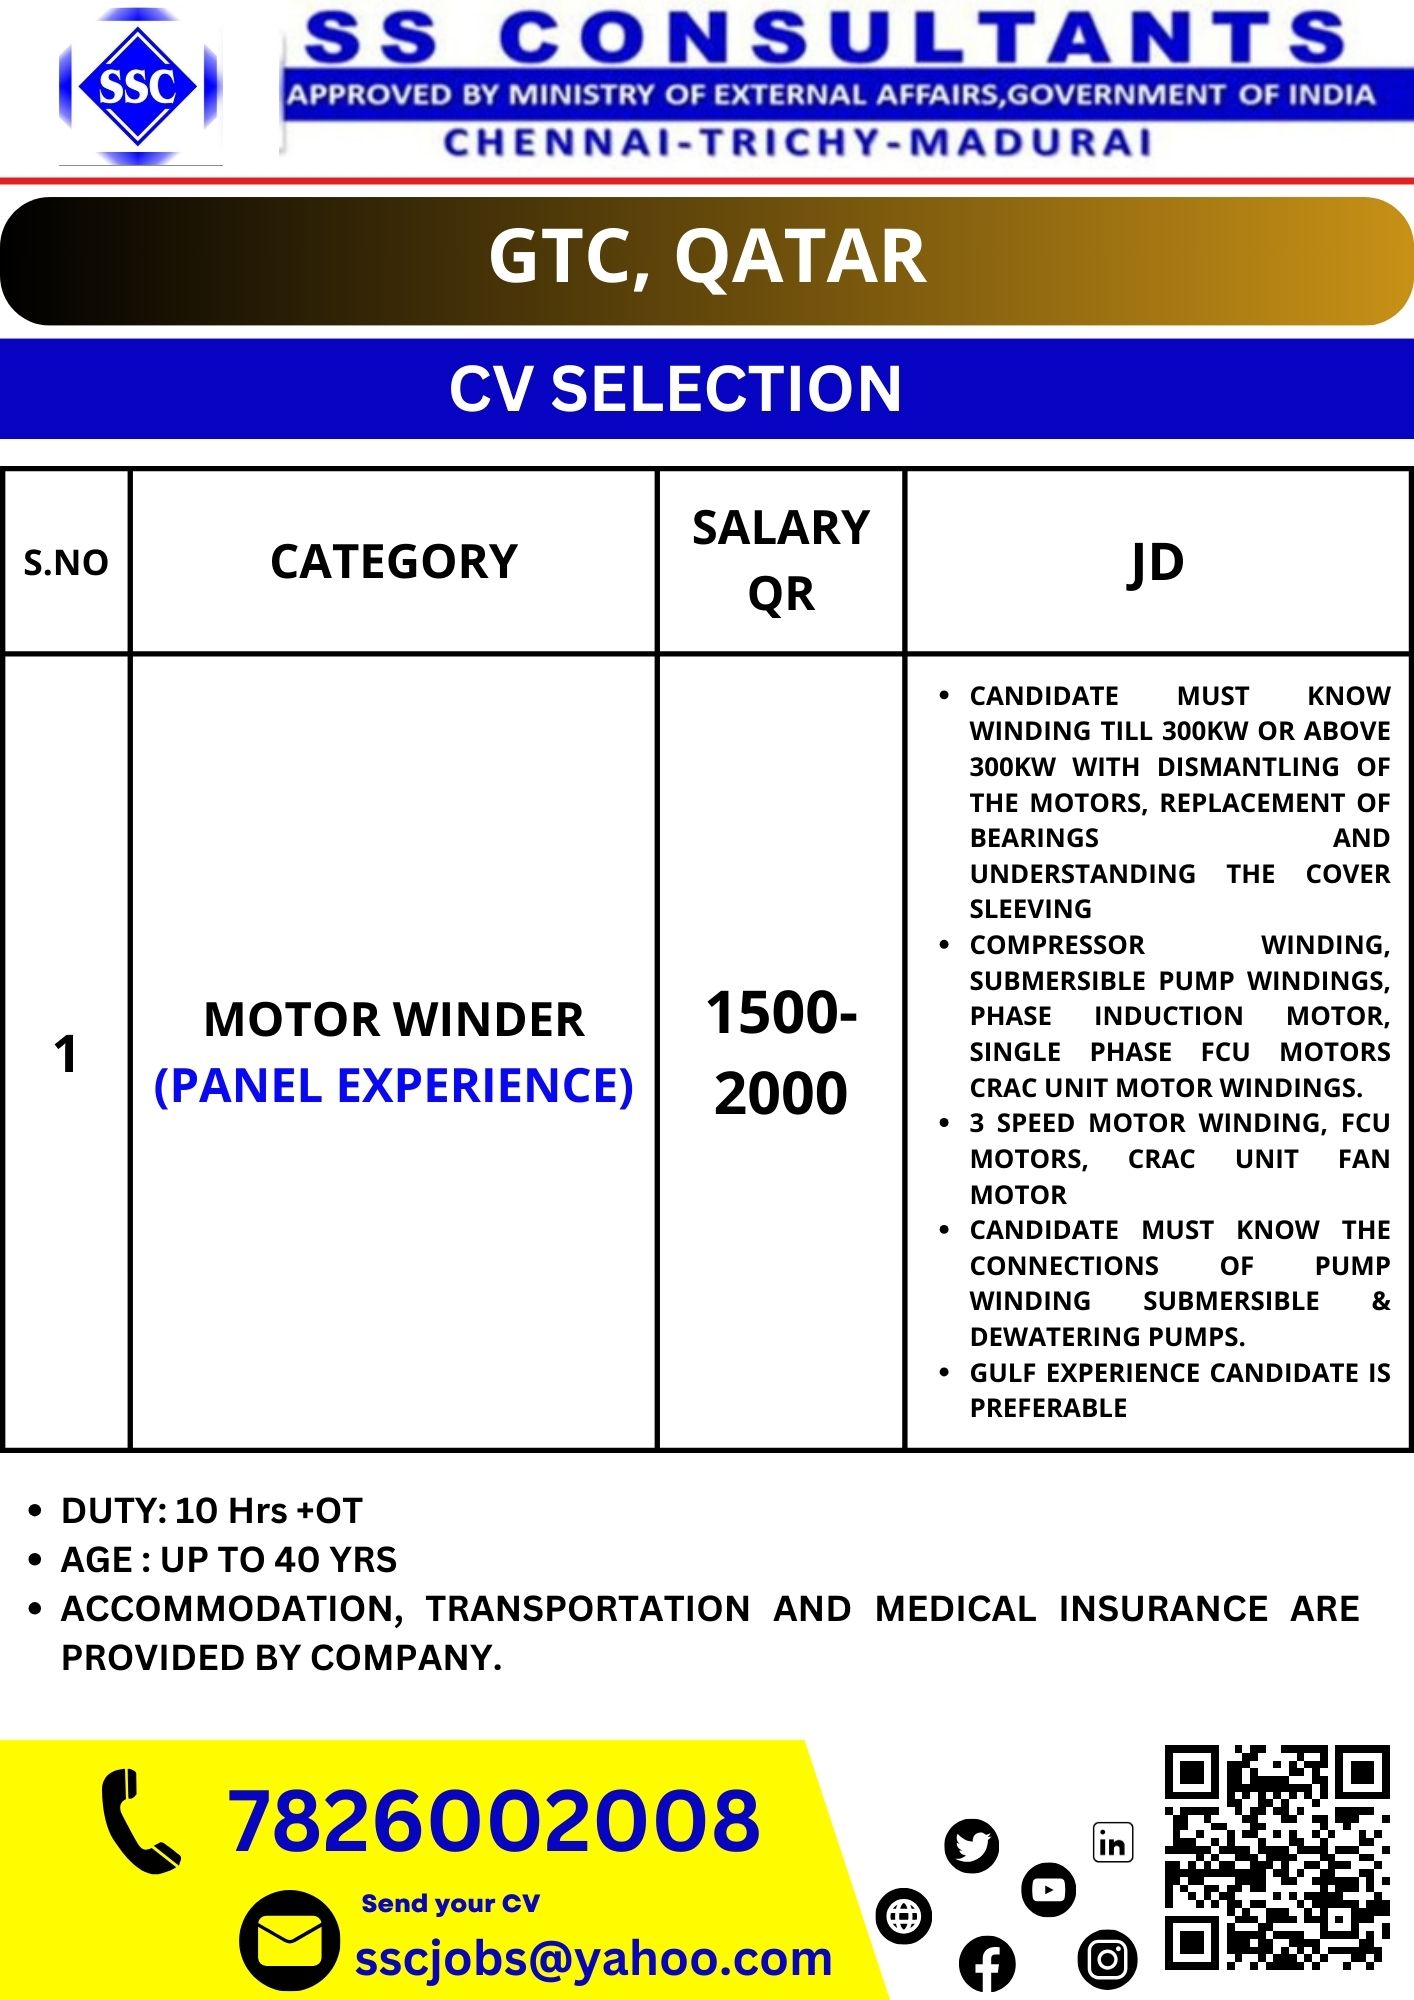 cv selection requirements 87